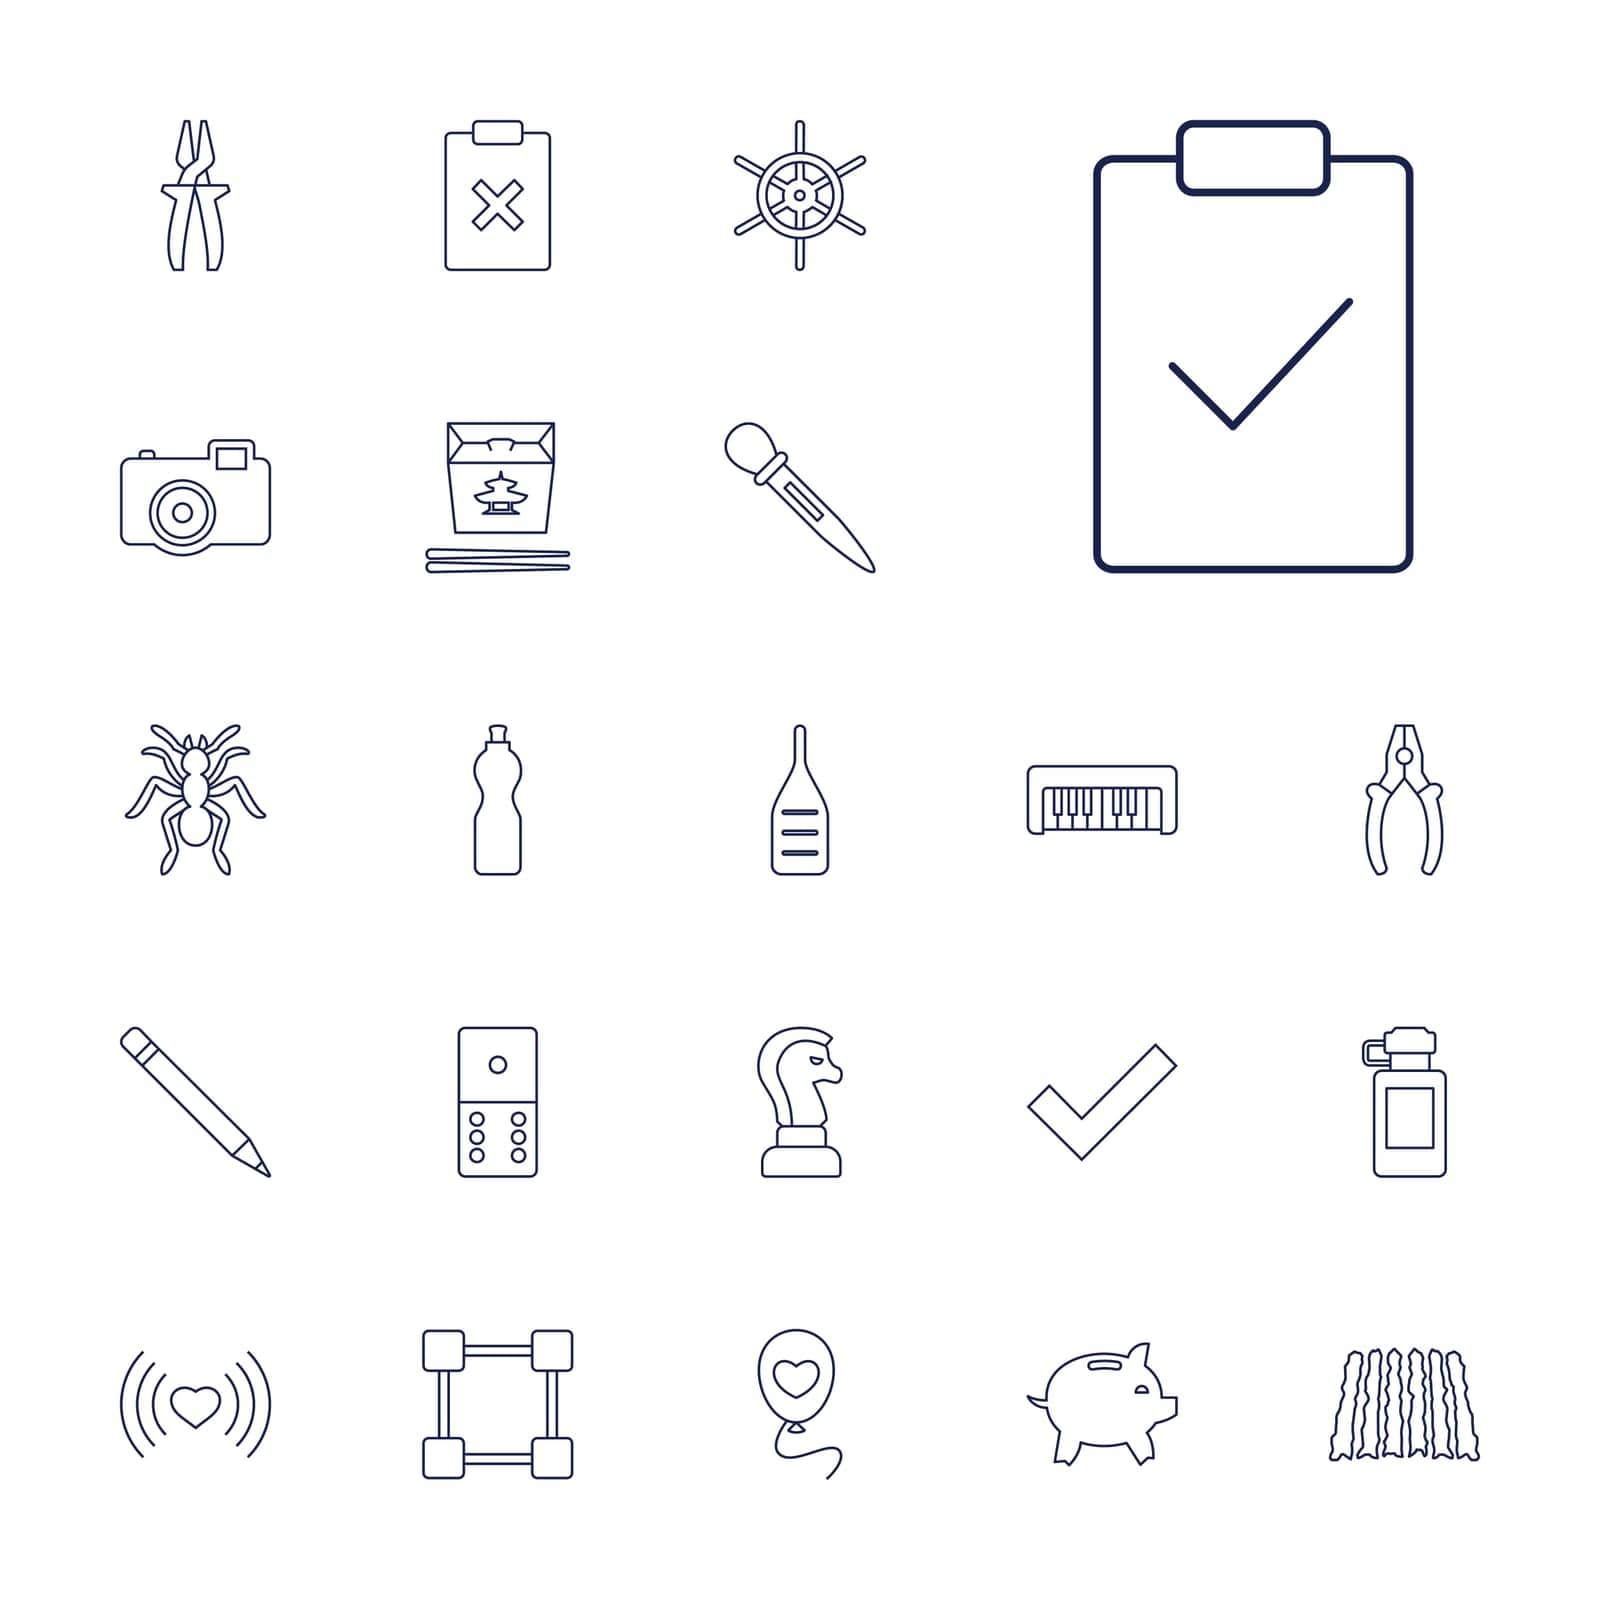 symbol,shadow,balloons,icon,sign,for,box,bottle,clipboard,helm,network,chinese,piano,sawing,fitness,design,pen,pliers,connection,vector,domino,camera,toy,chess,set,nail,ant,cross,tick,food,heart,horse,with,fast,field,money,background,illustration by ogqcorp